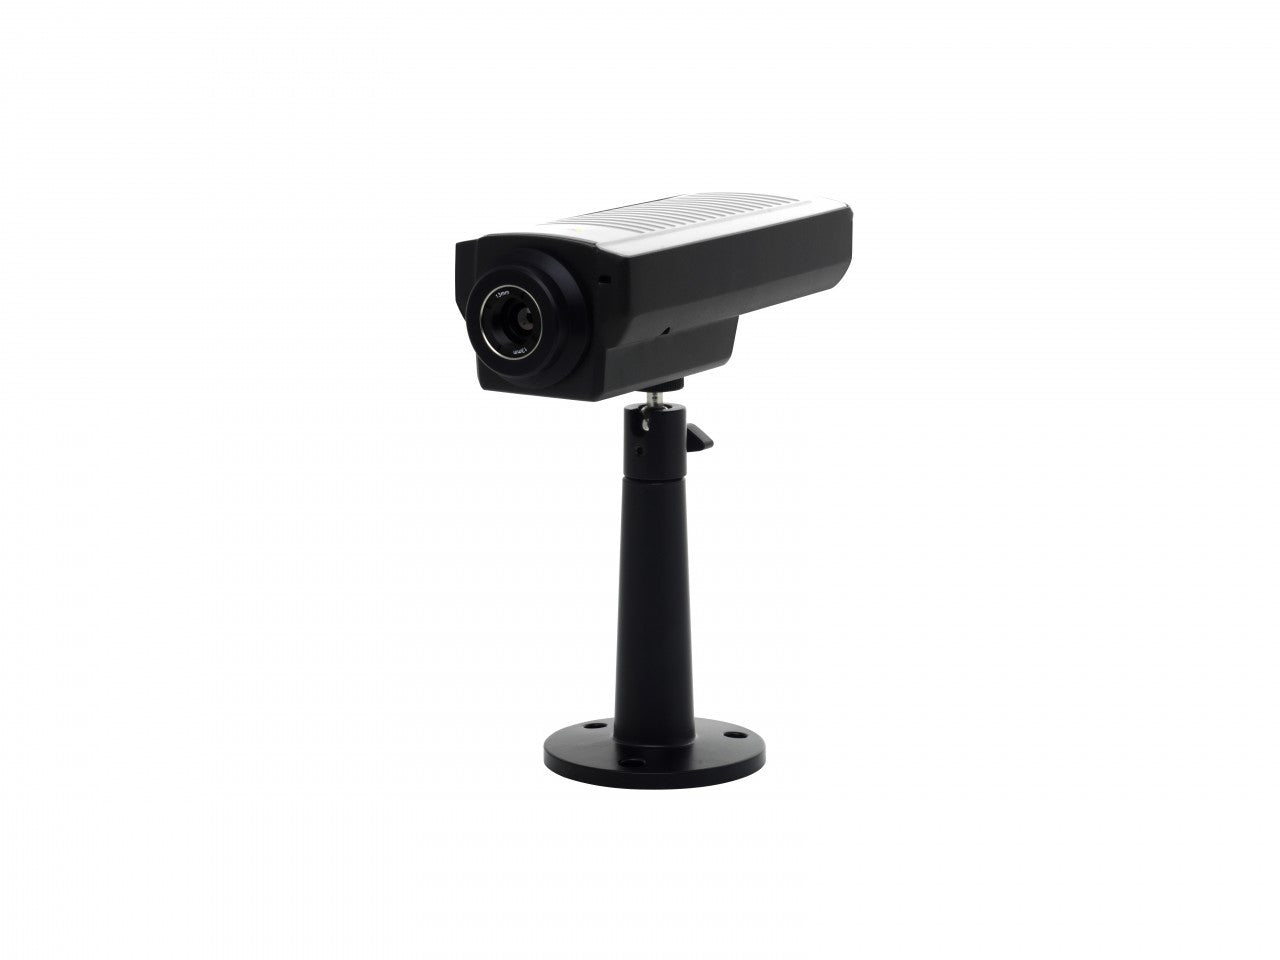 AXIS Q1910 (0334-001) Thermal Network Camera